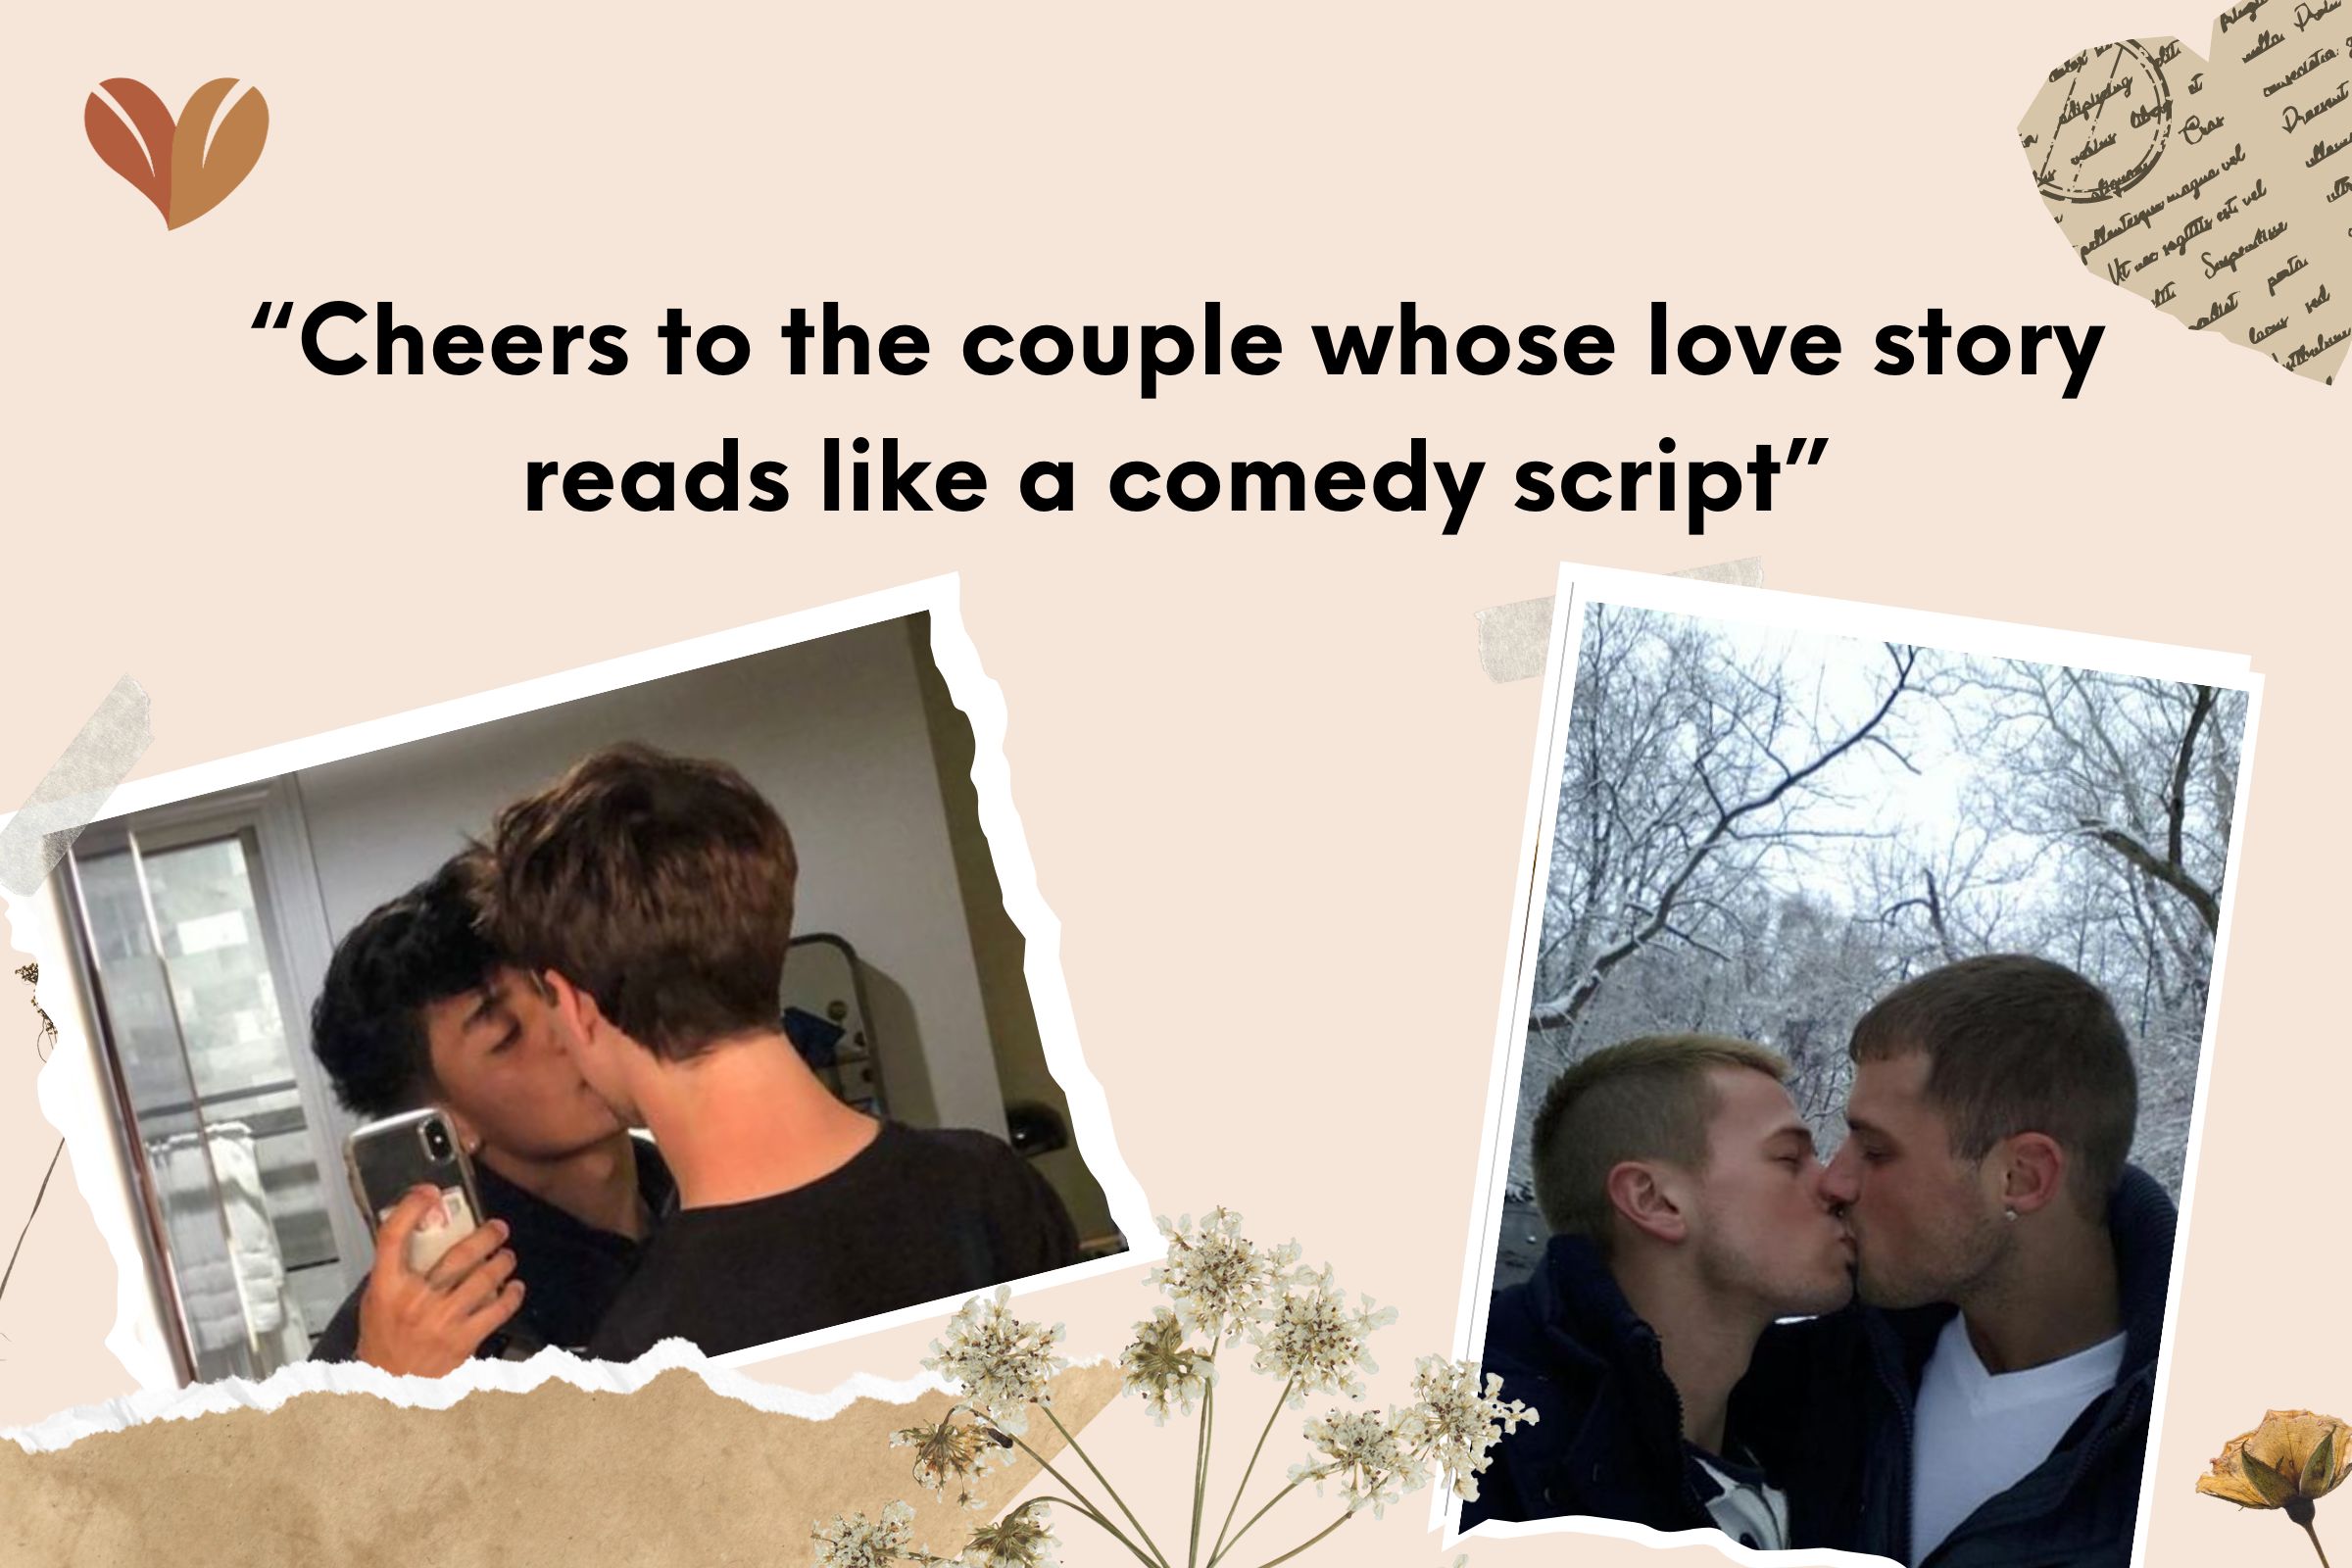 “Cheers to the couple whose love story reads like a comedy script”